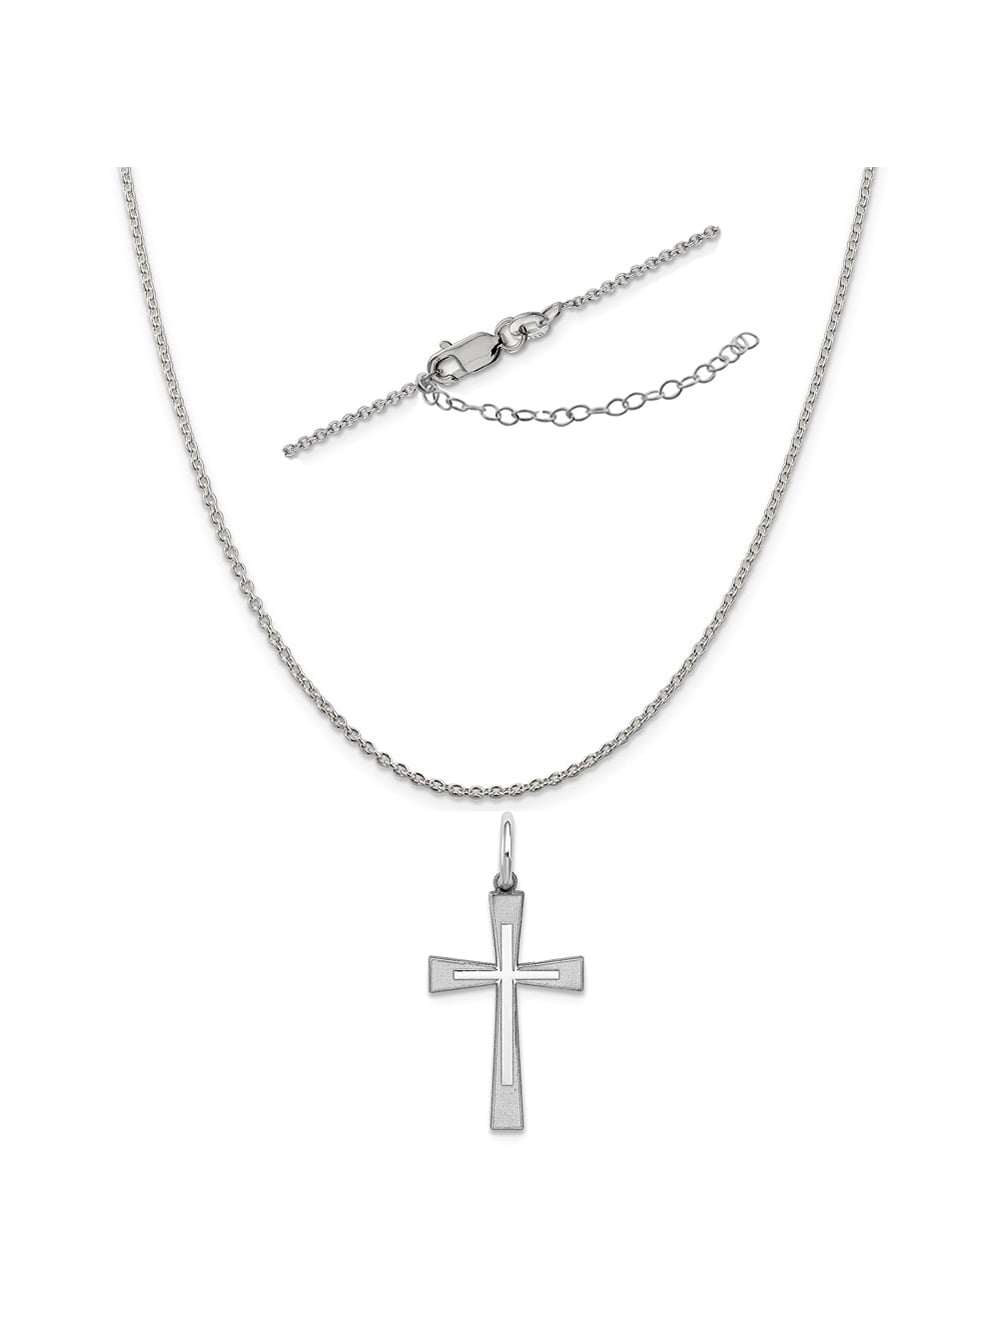 Sterling Silver Anti-Tarnish Treated Laser Designed Cross Charm on an Adjustable Chain Necklace